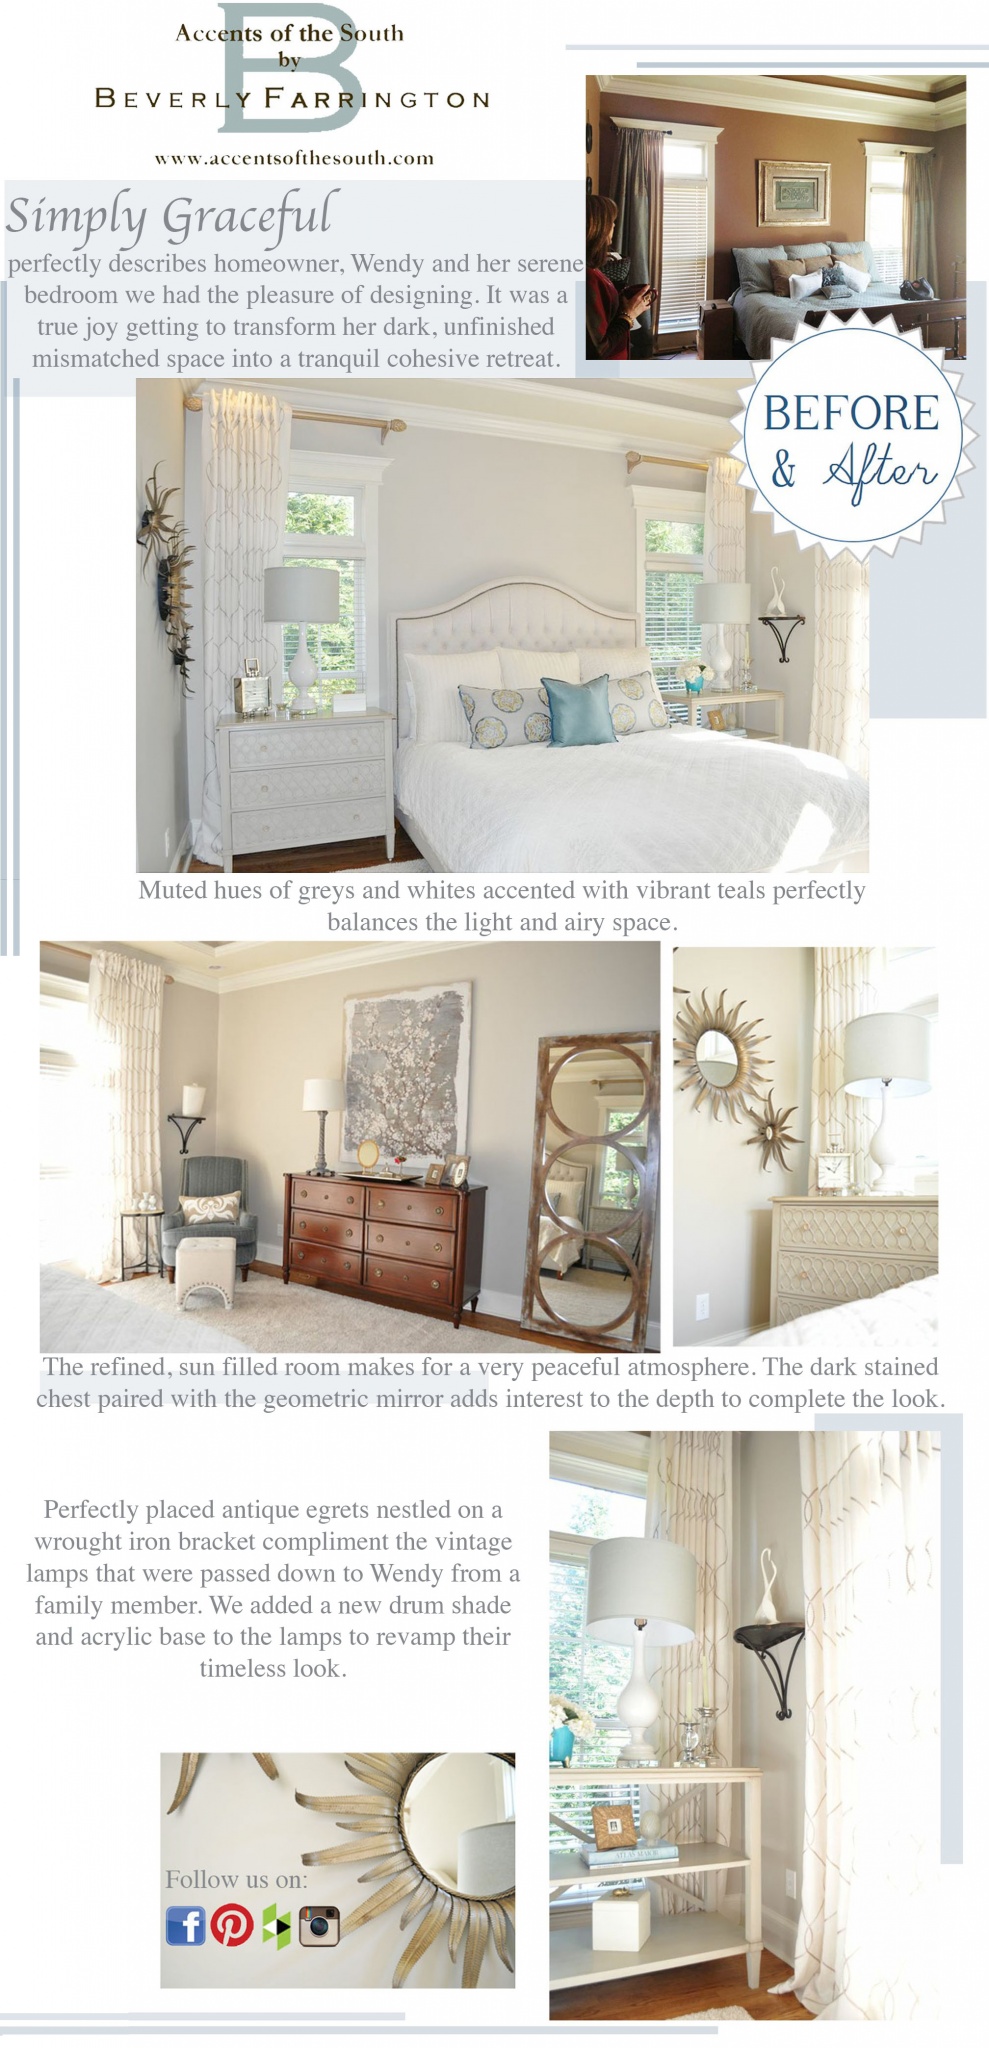 Huntsville Alabama Master Bedroom Design Accents of the South by Beverly Farrington